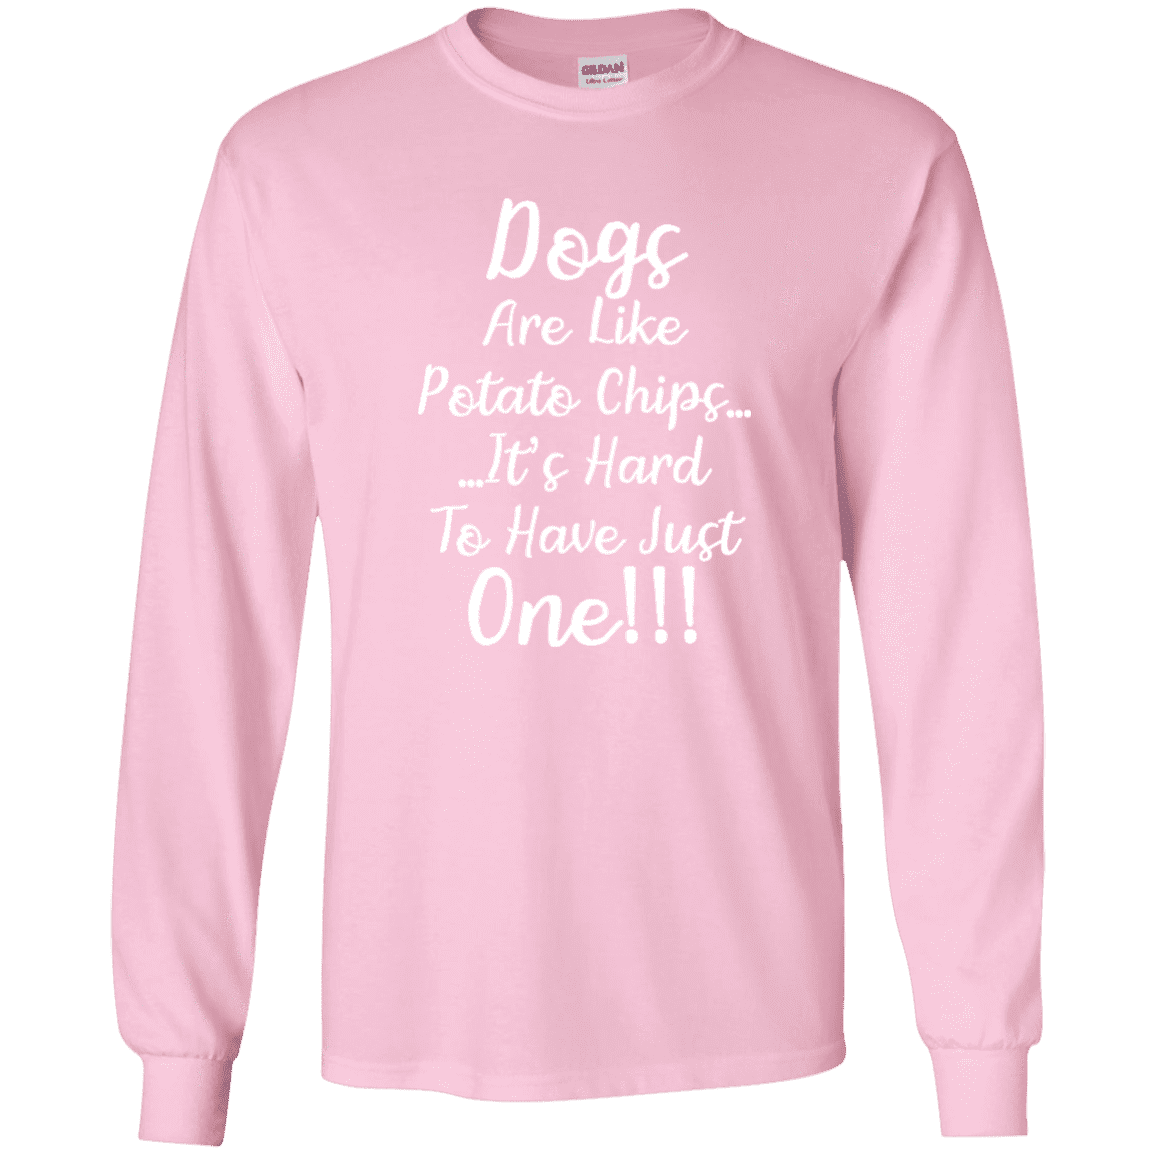 Dogs Are Like Potato Chips - Long Sleeve T Shirt.